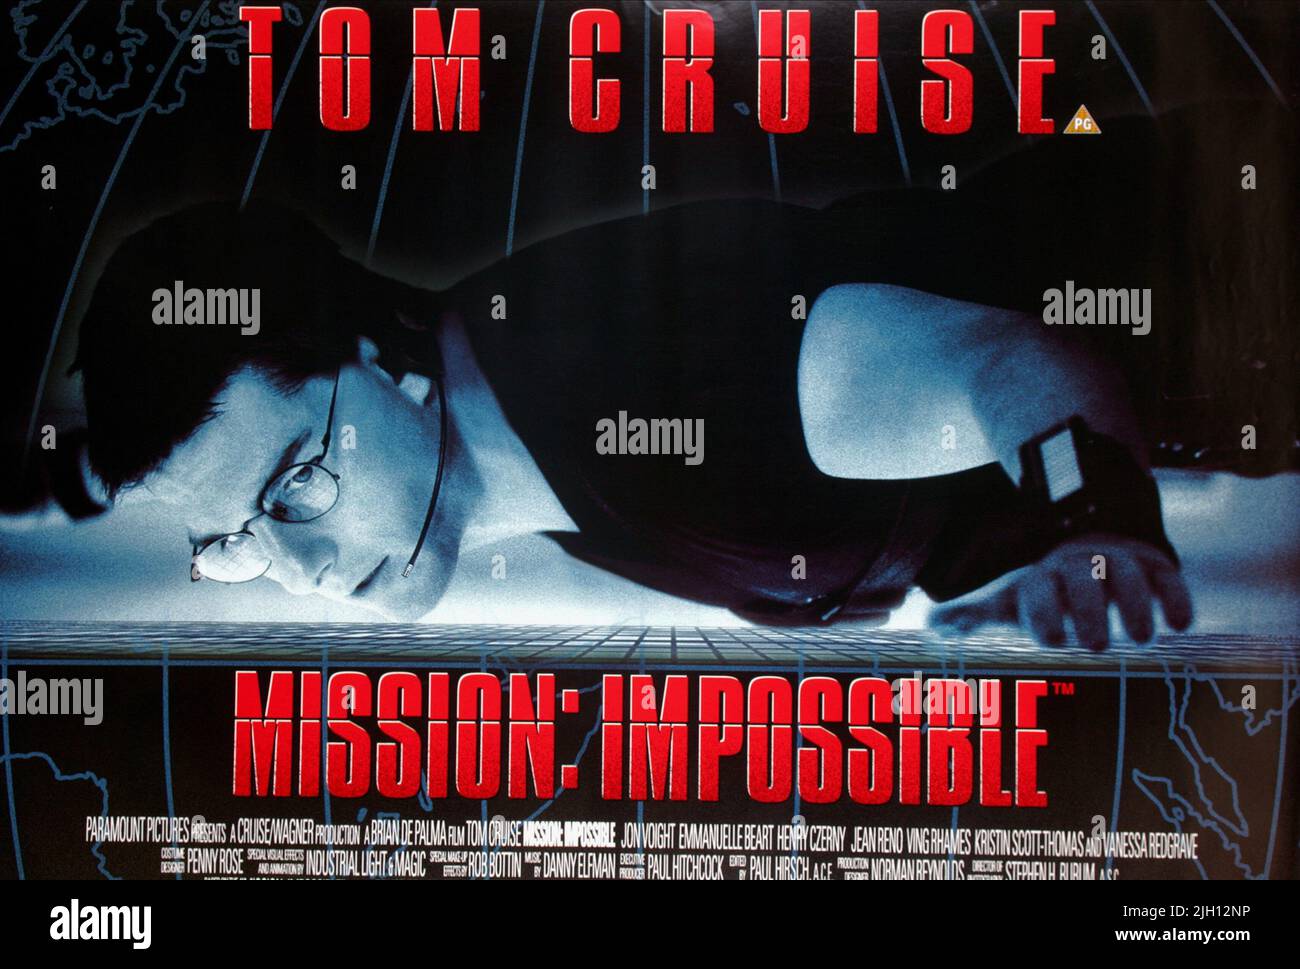 TOM CRUISE POSTER, MISSION: IMPOSSIBLE, 1996 Stock Photo